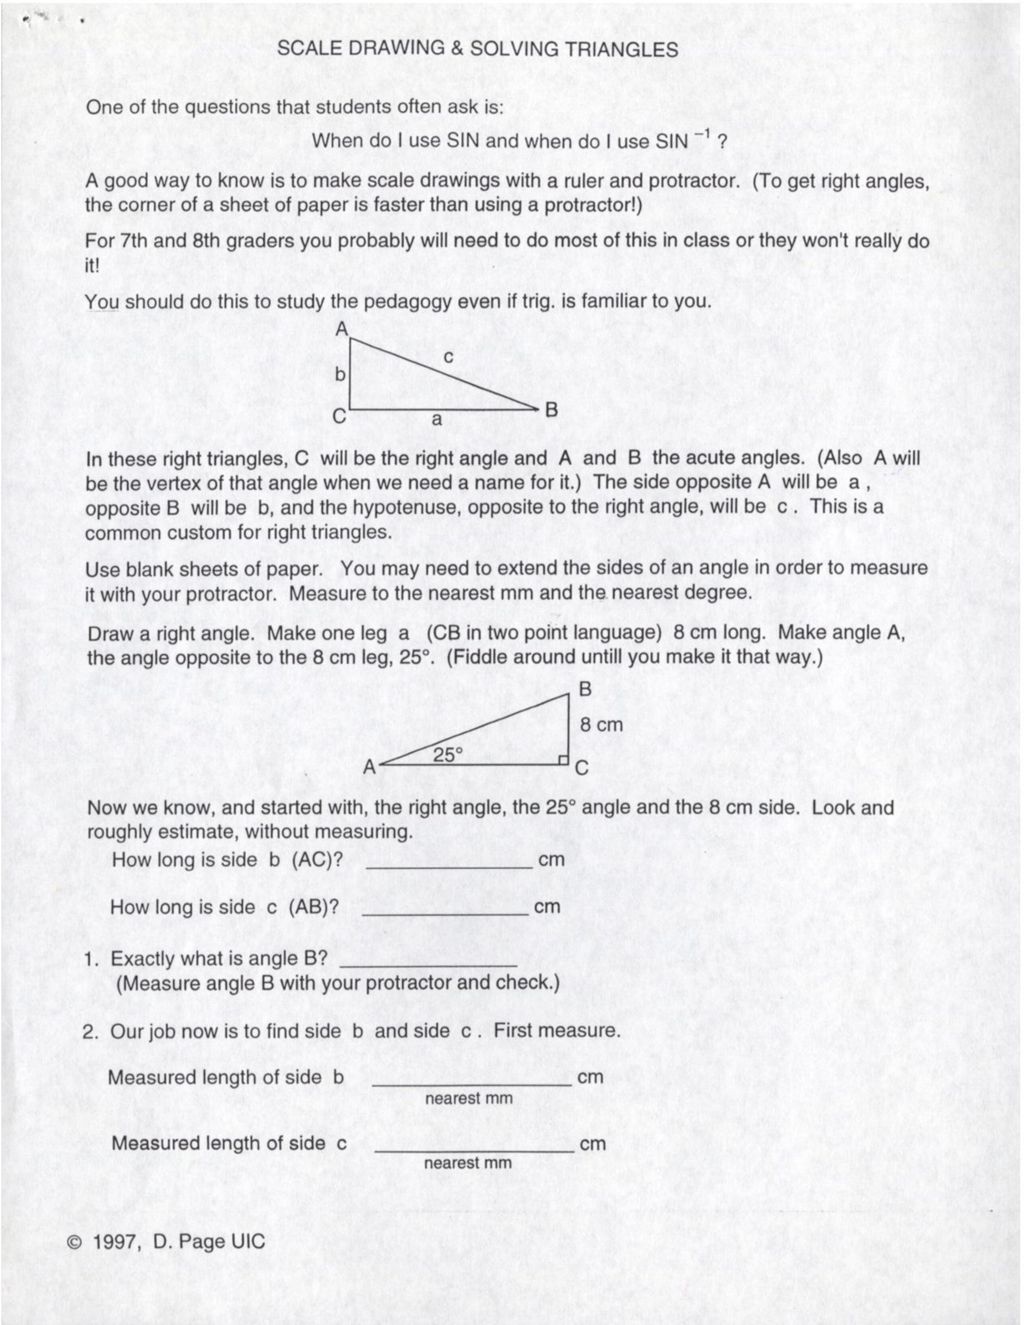 Scale Drawing & Solving Triangles (1997)